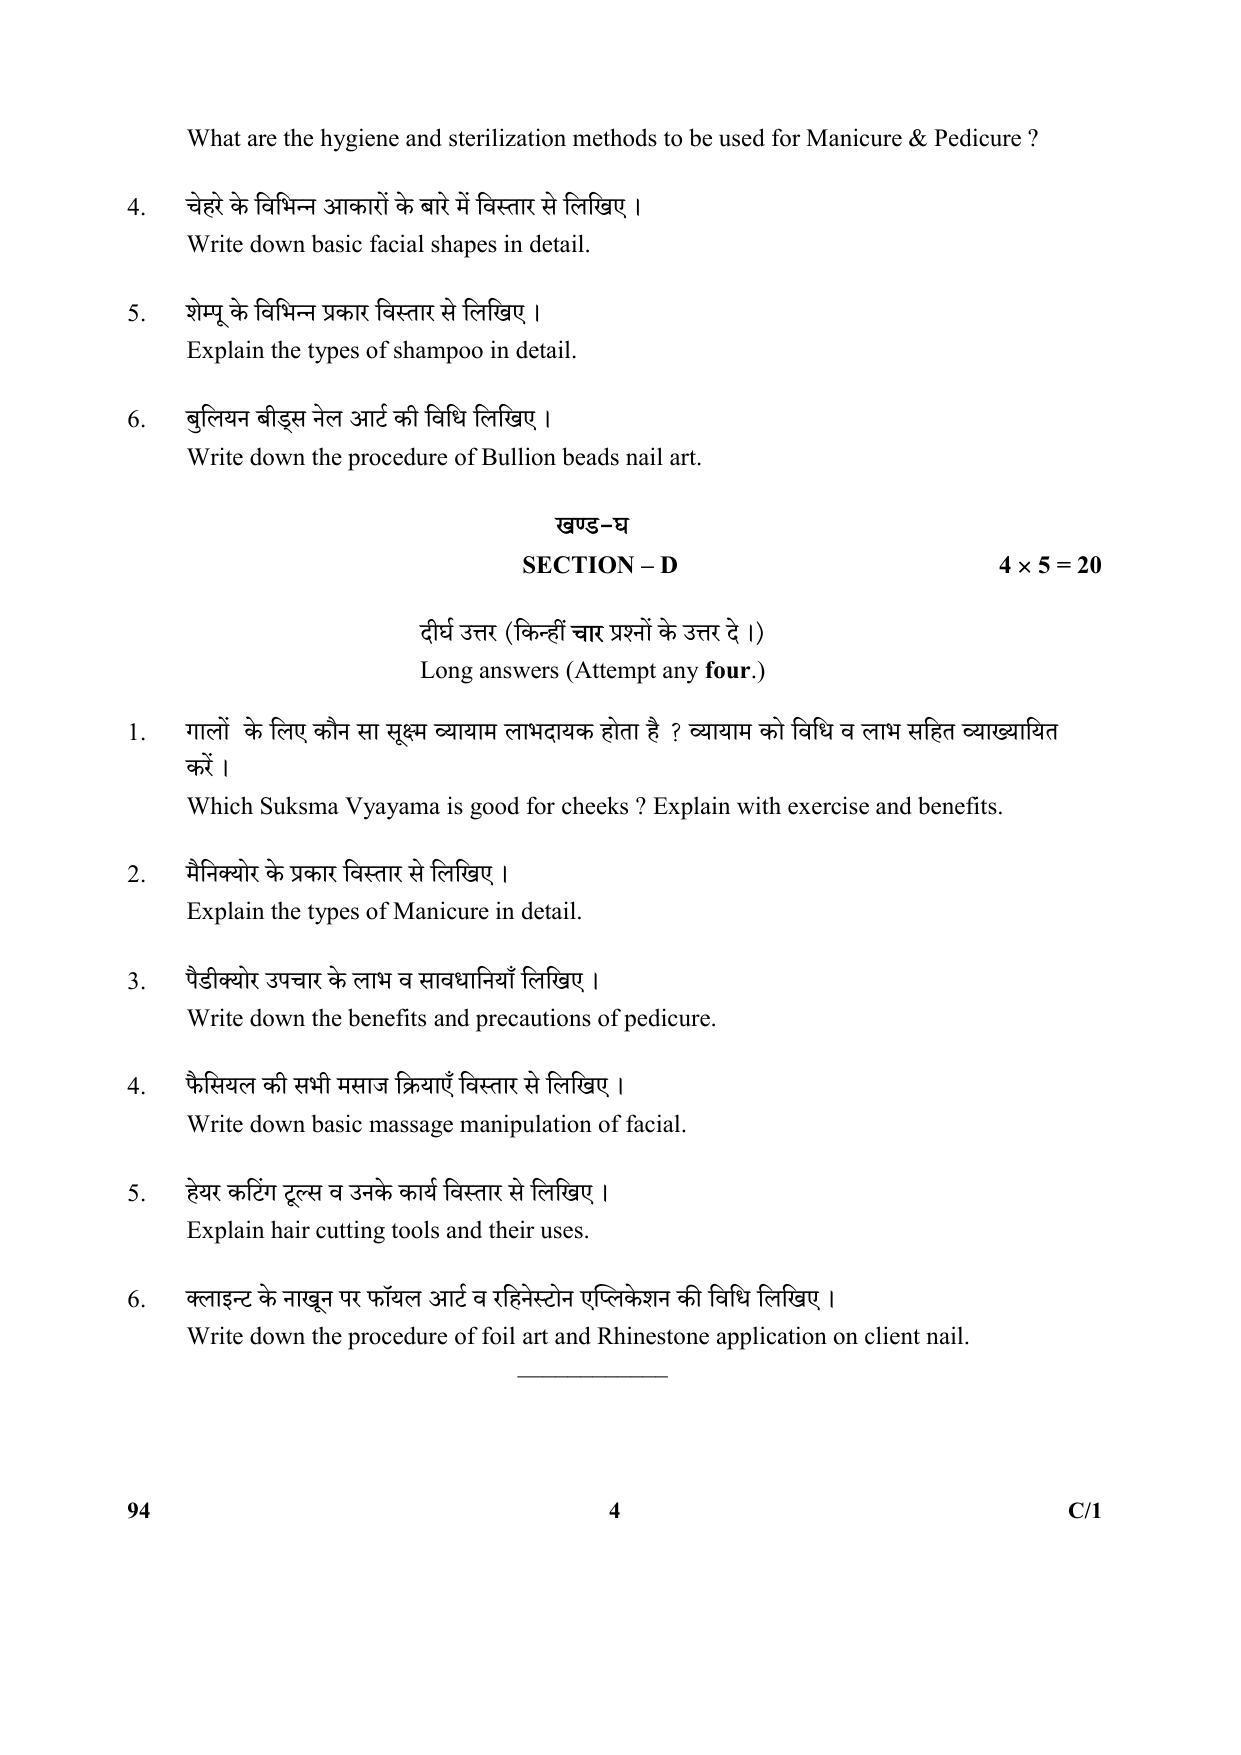 CBSE Class 10 94 (Beauty And Wellness) 2018 Compartment Question Paper - Page 4